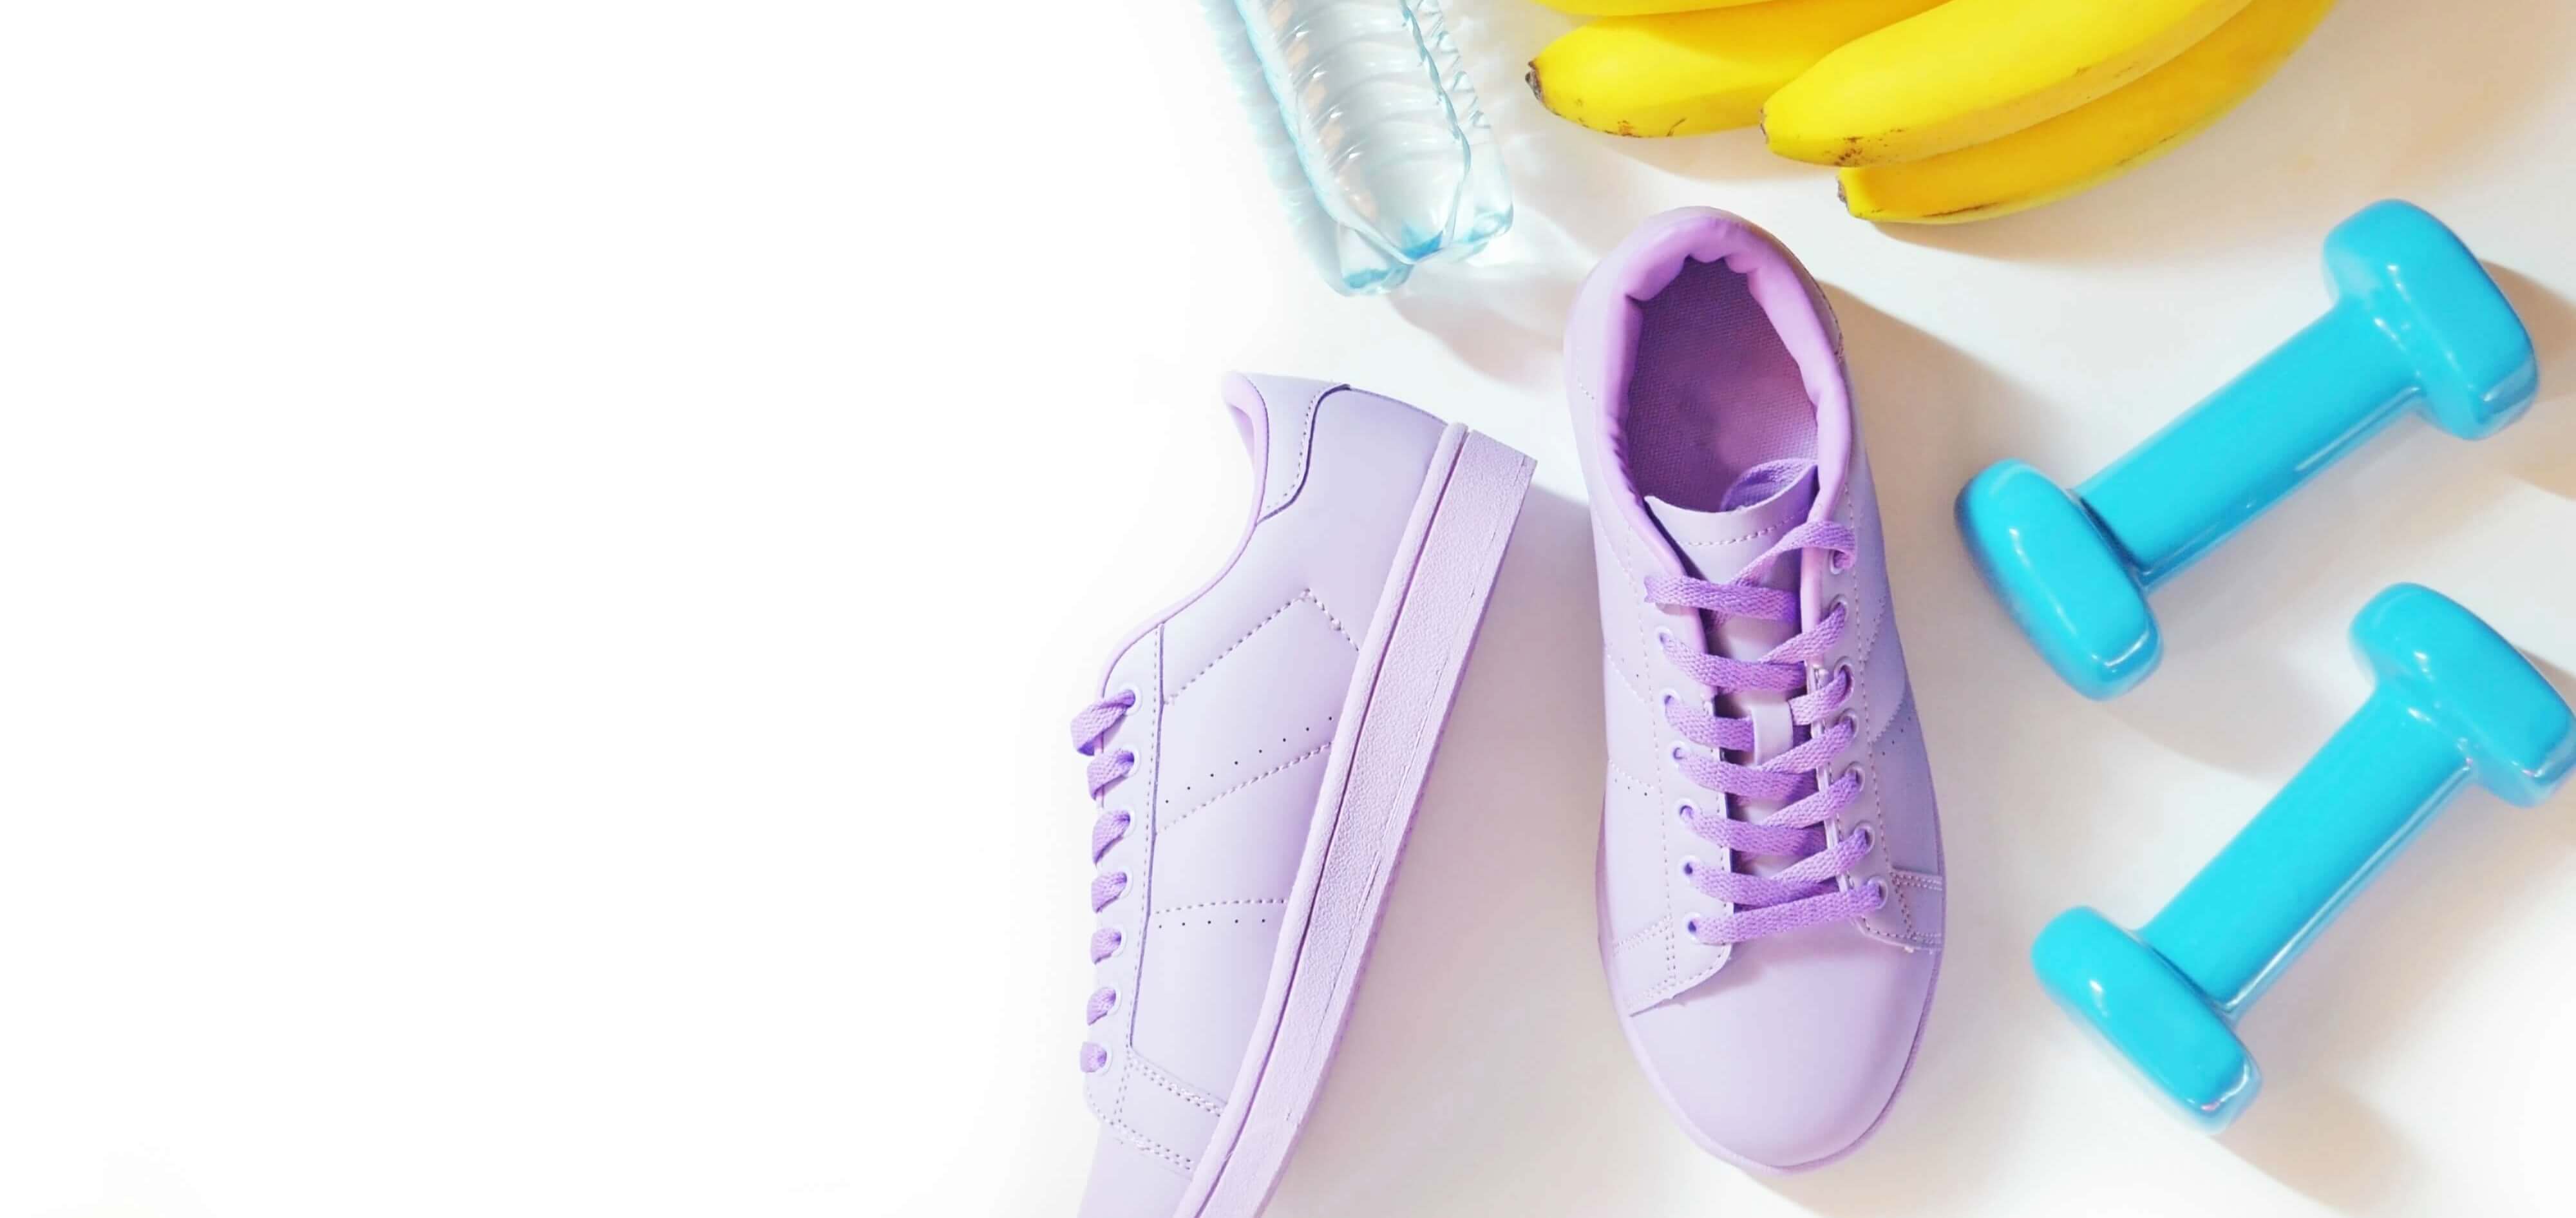 Purple trainers, blue weights, bananas & water